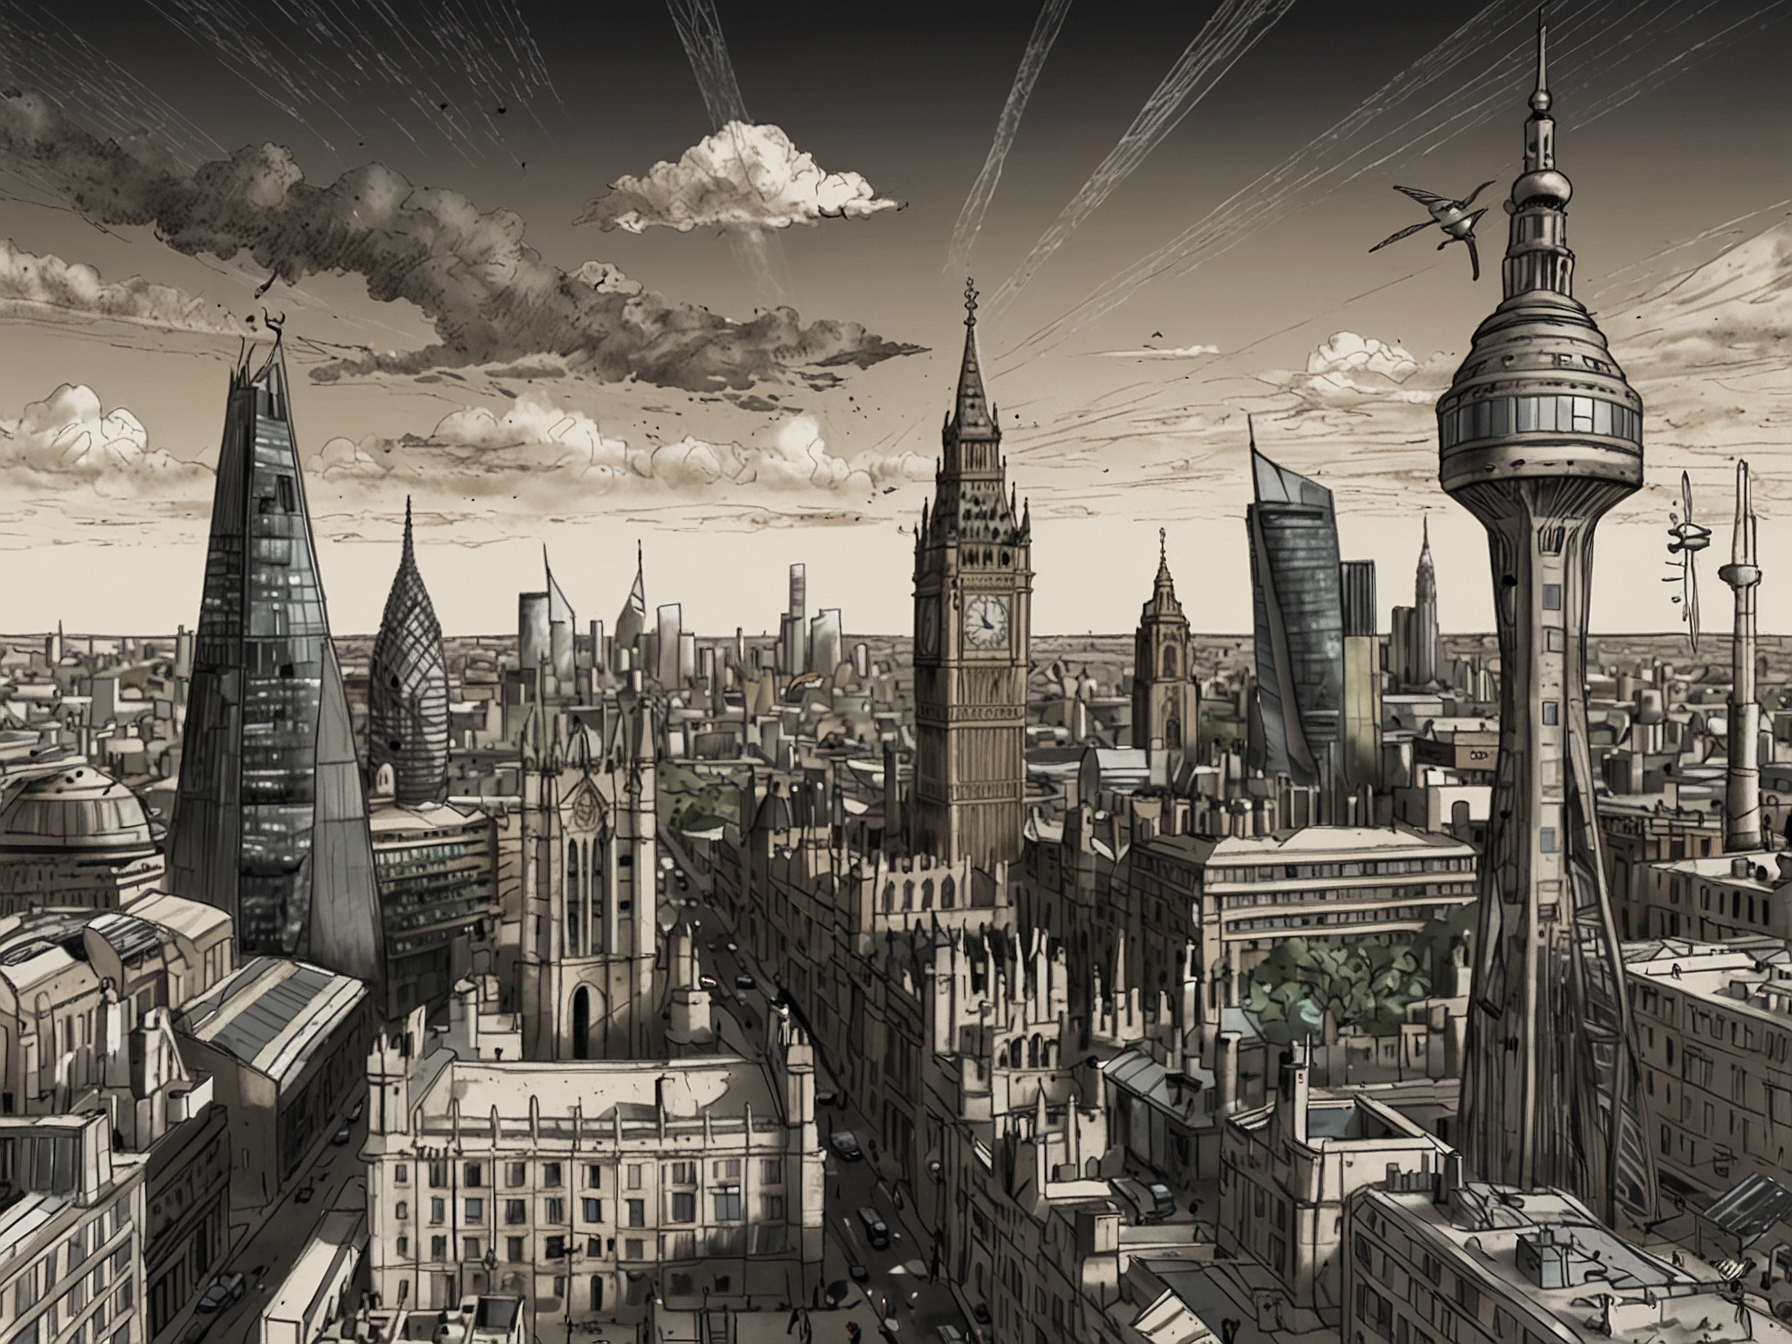 An illustration of a bustling UK cityscape, juxtaposed with renewable energy elements and symbols of law enforcement, embodying Reform UK's vision for a pragmatic and reformed nation.